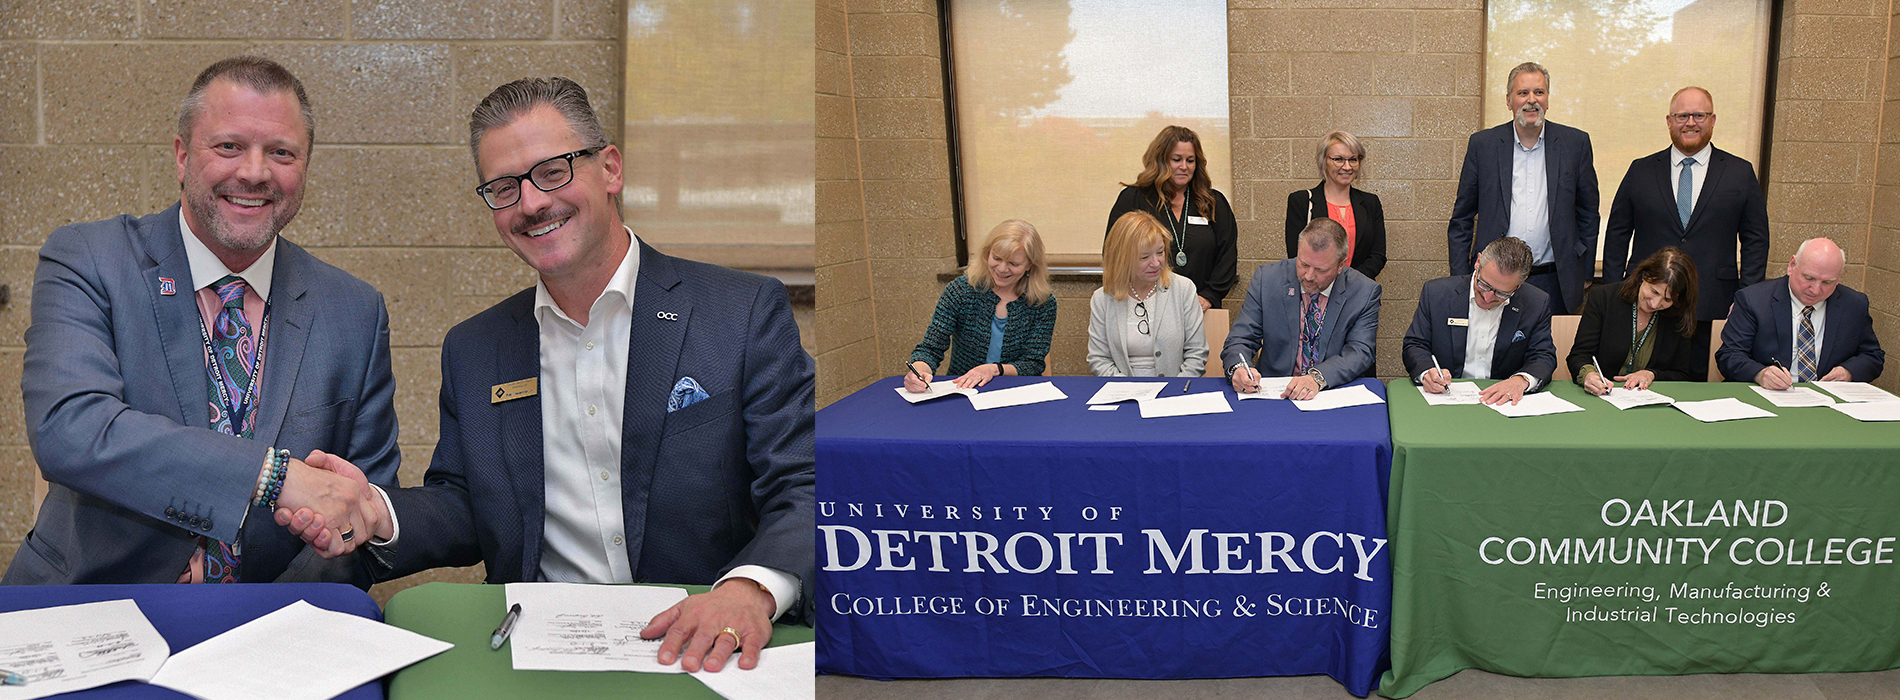 At left, two people sitting at a table shake hands and smile for a photo indoors. At right, six people sit at a table and sign papers, with four more standing behind them indoors. Banners in front of them read University of Detroit Mercy College of Engineering & Science and Oakland Community College, Engineering, Manufacturing & Industrial Technologies.